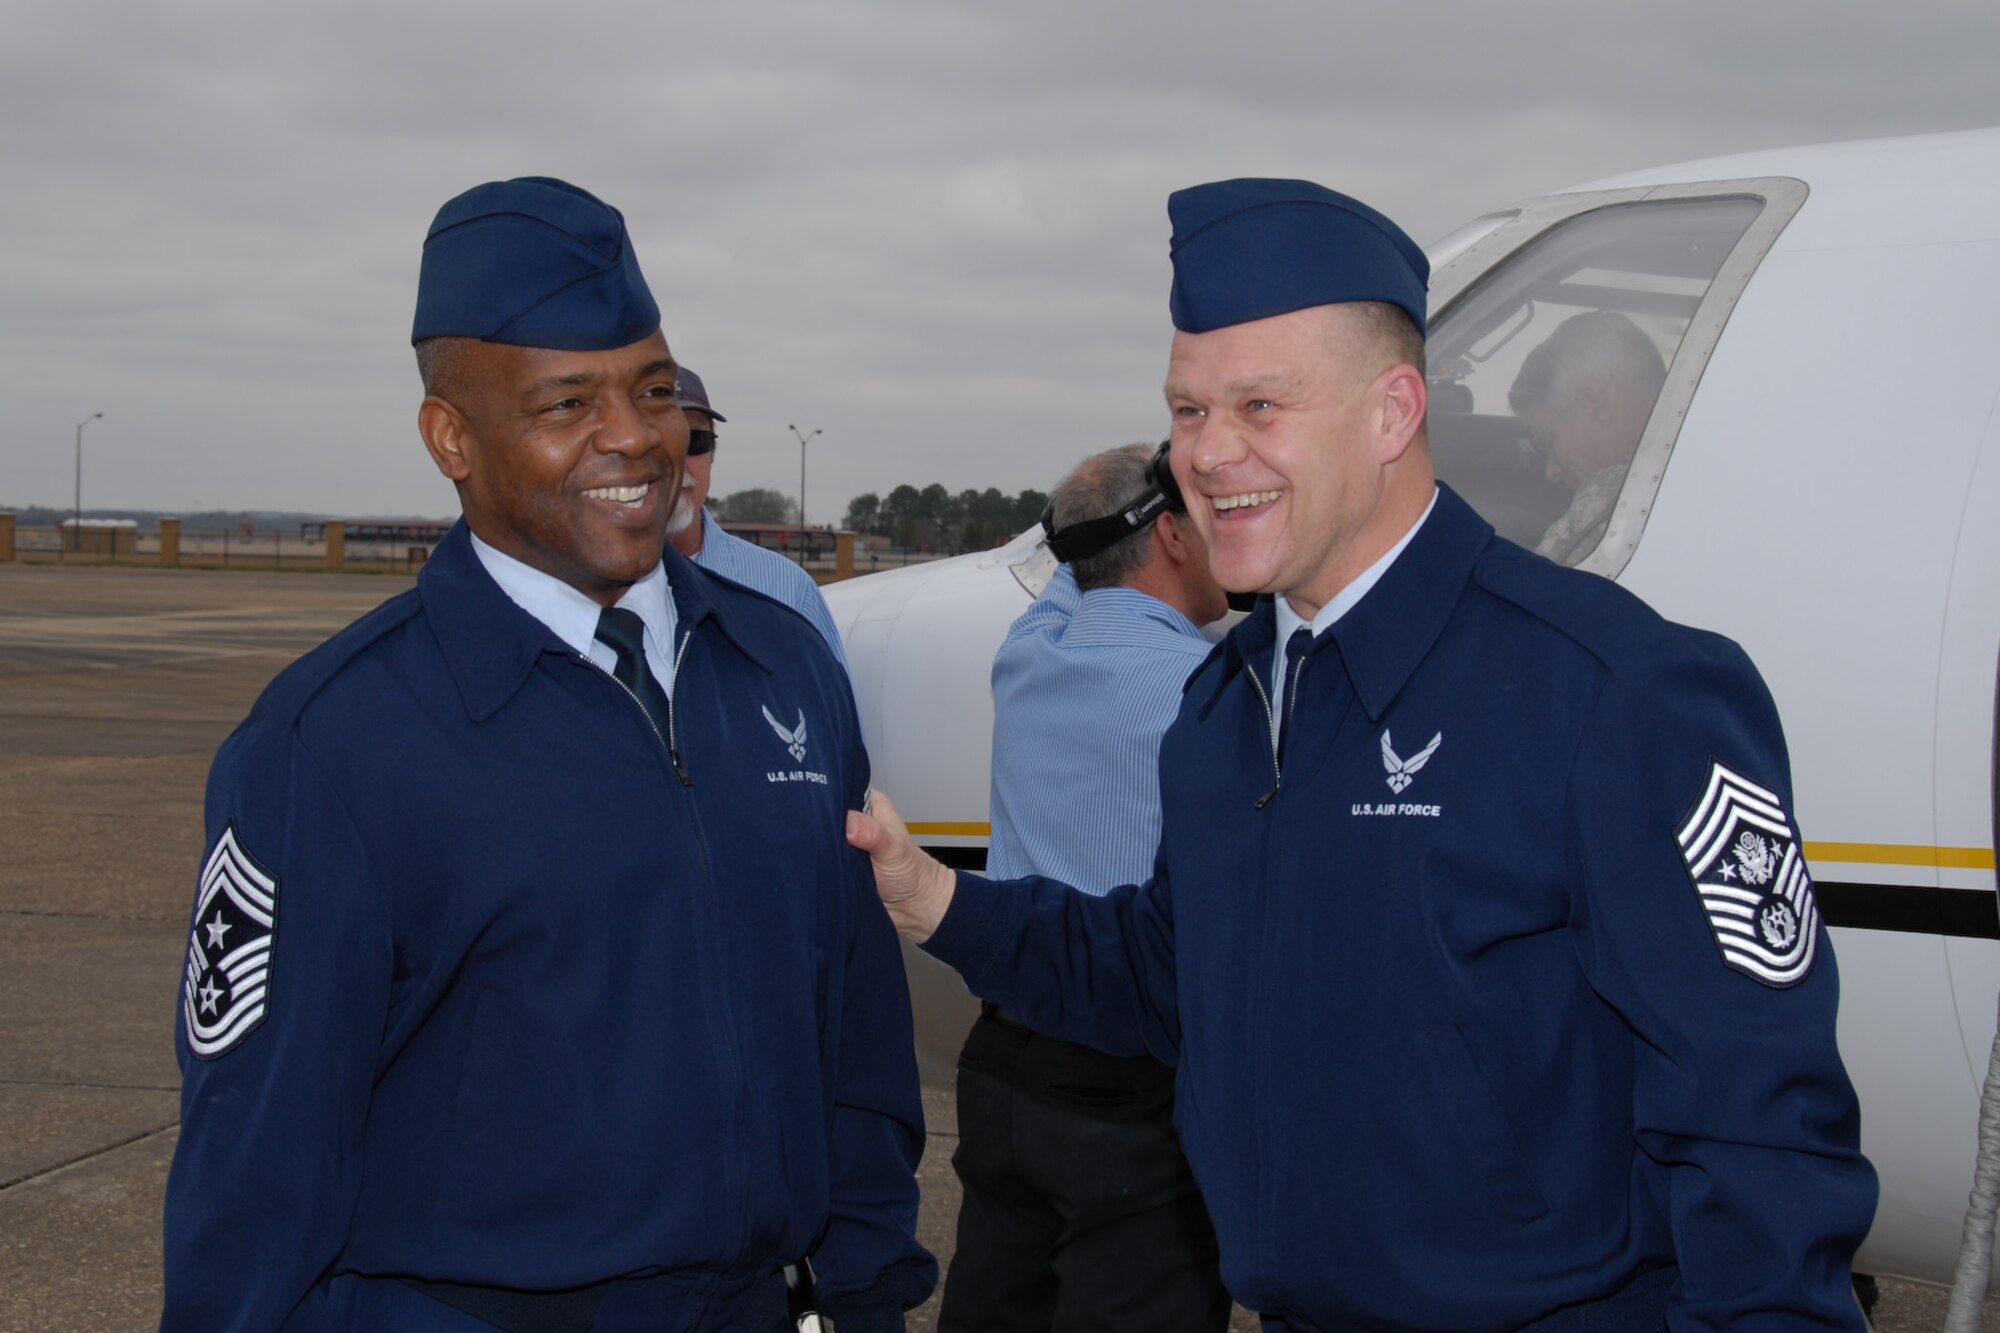 Chief Master Sgt. Brye McMillon, Air University command chief, greets Chief Master Sergeant of the Air Force James Roy on his arrival to Maxwell Air Force Base, Feb. 22. (Official Air Force Photo by Henry Hancock)